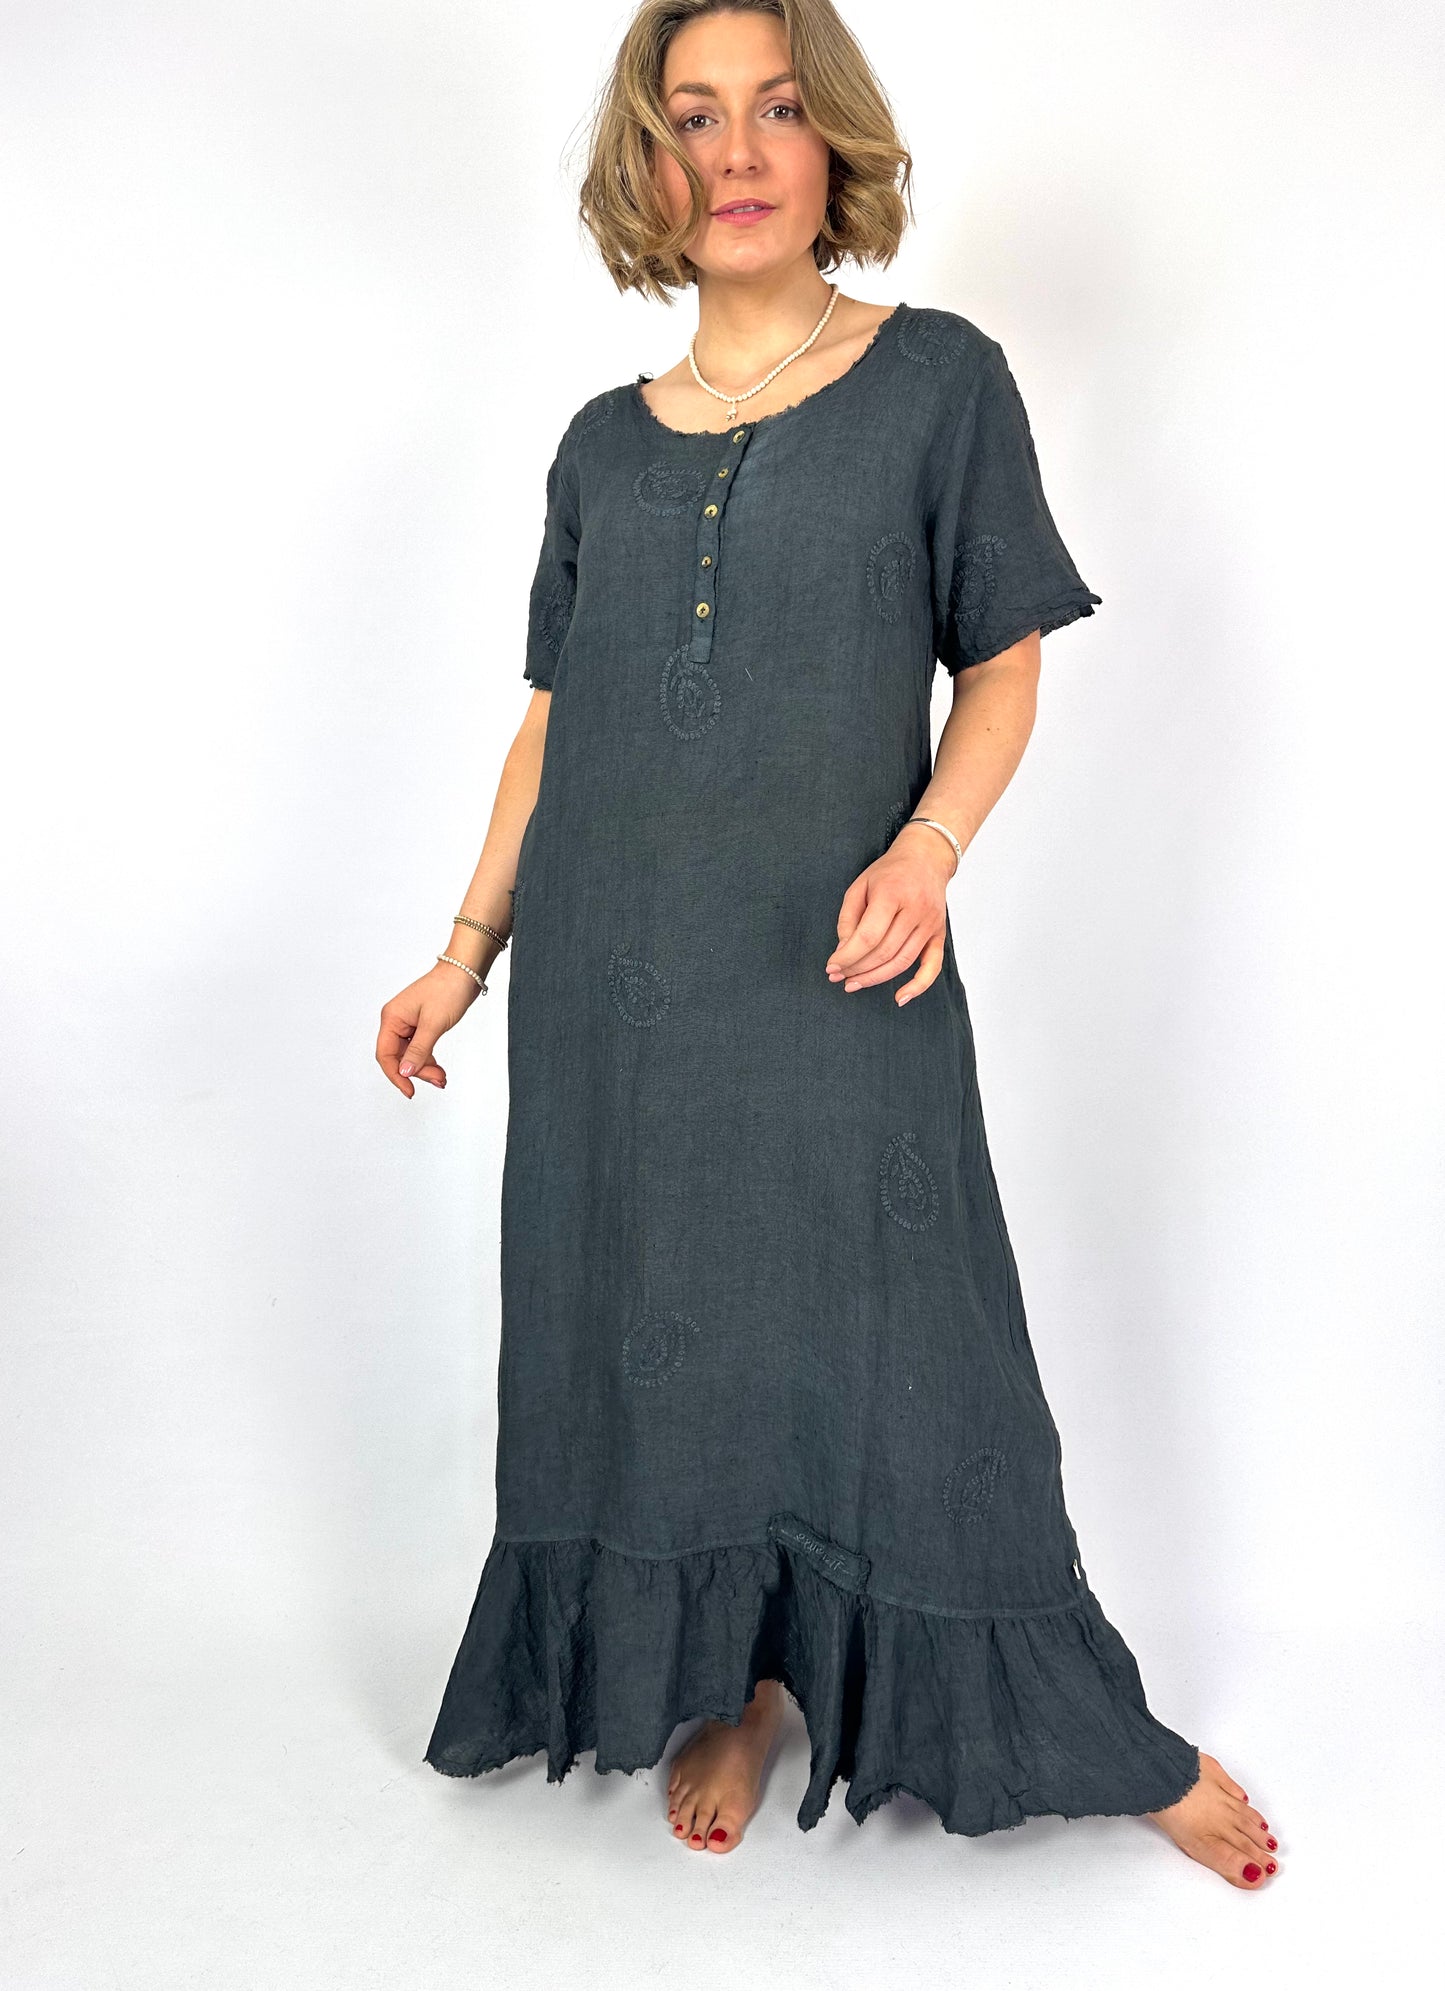 Agencies TurQuoise Paola Dress Charcoal